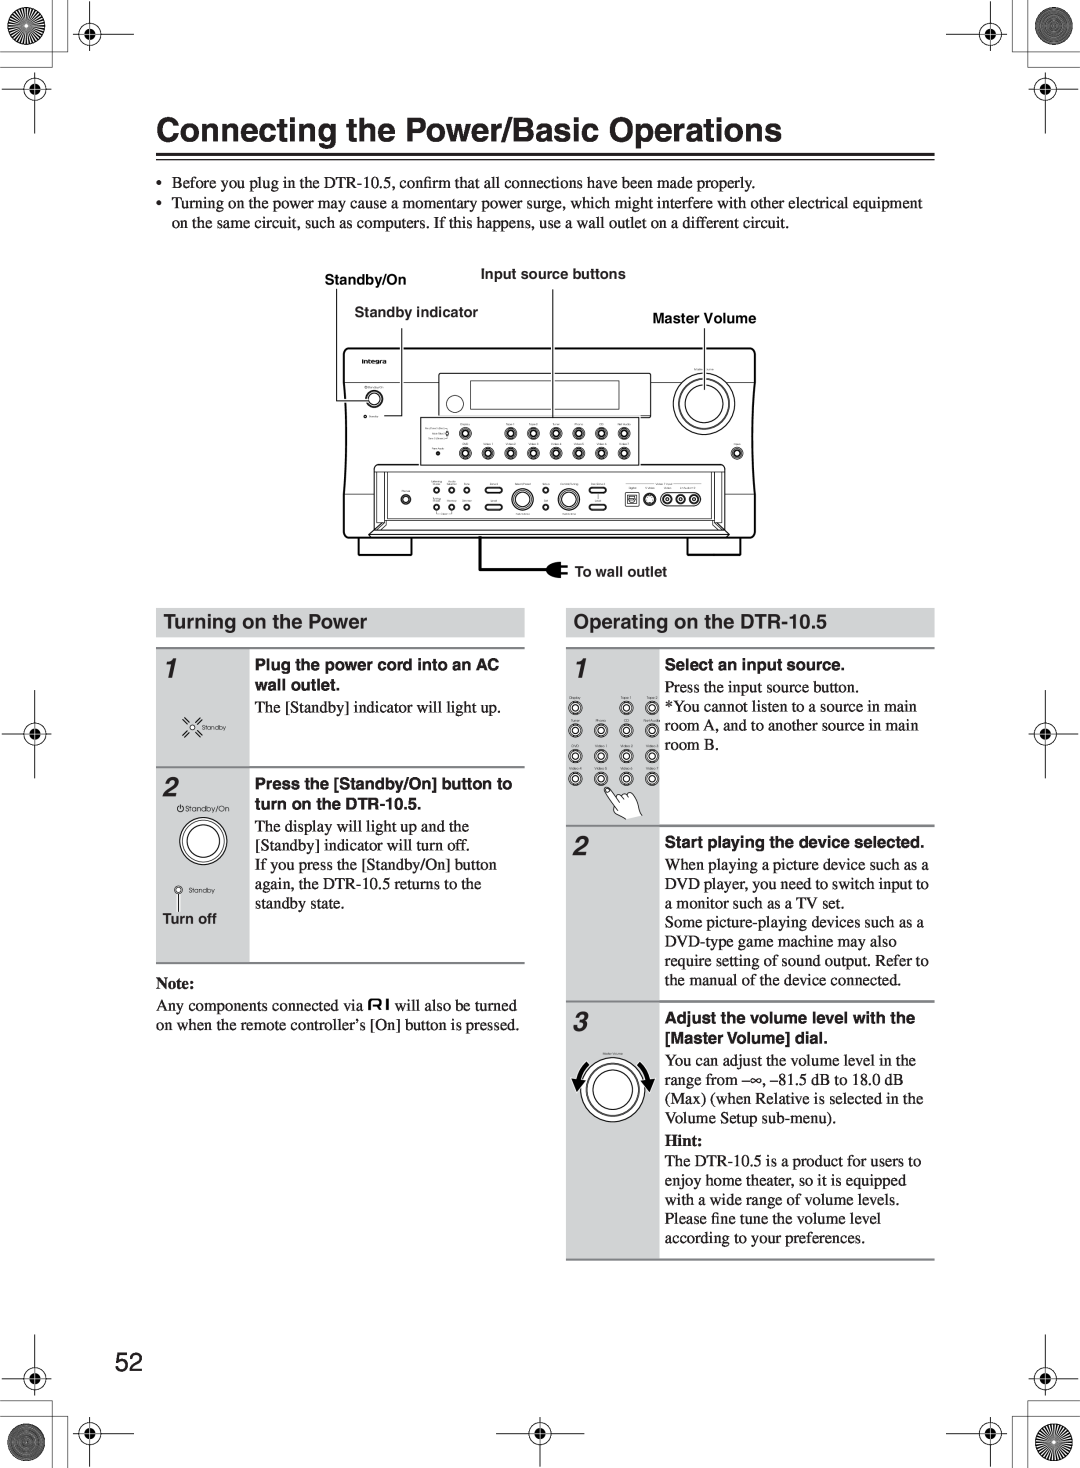 Integra instruction manual Connecting the Power/Basic Operations, Turning on the Power, Operating on the DTR-10.5, Hint 